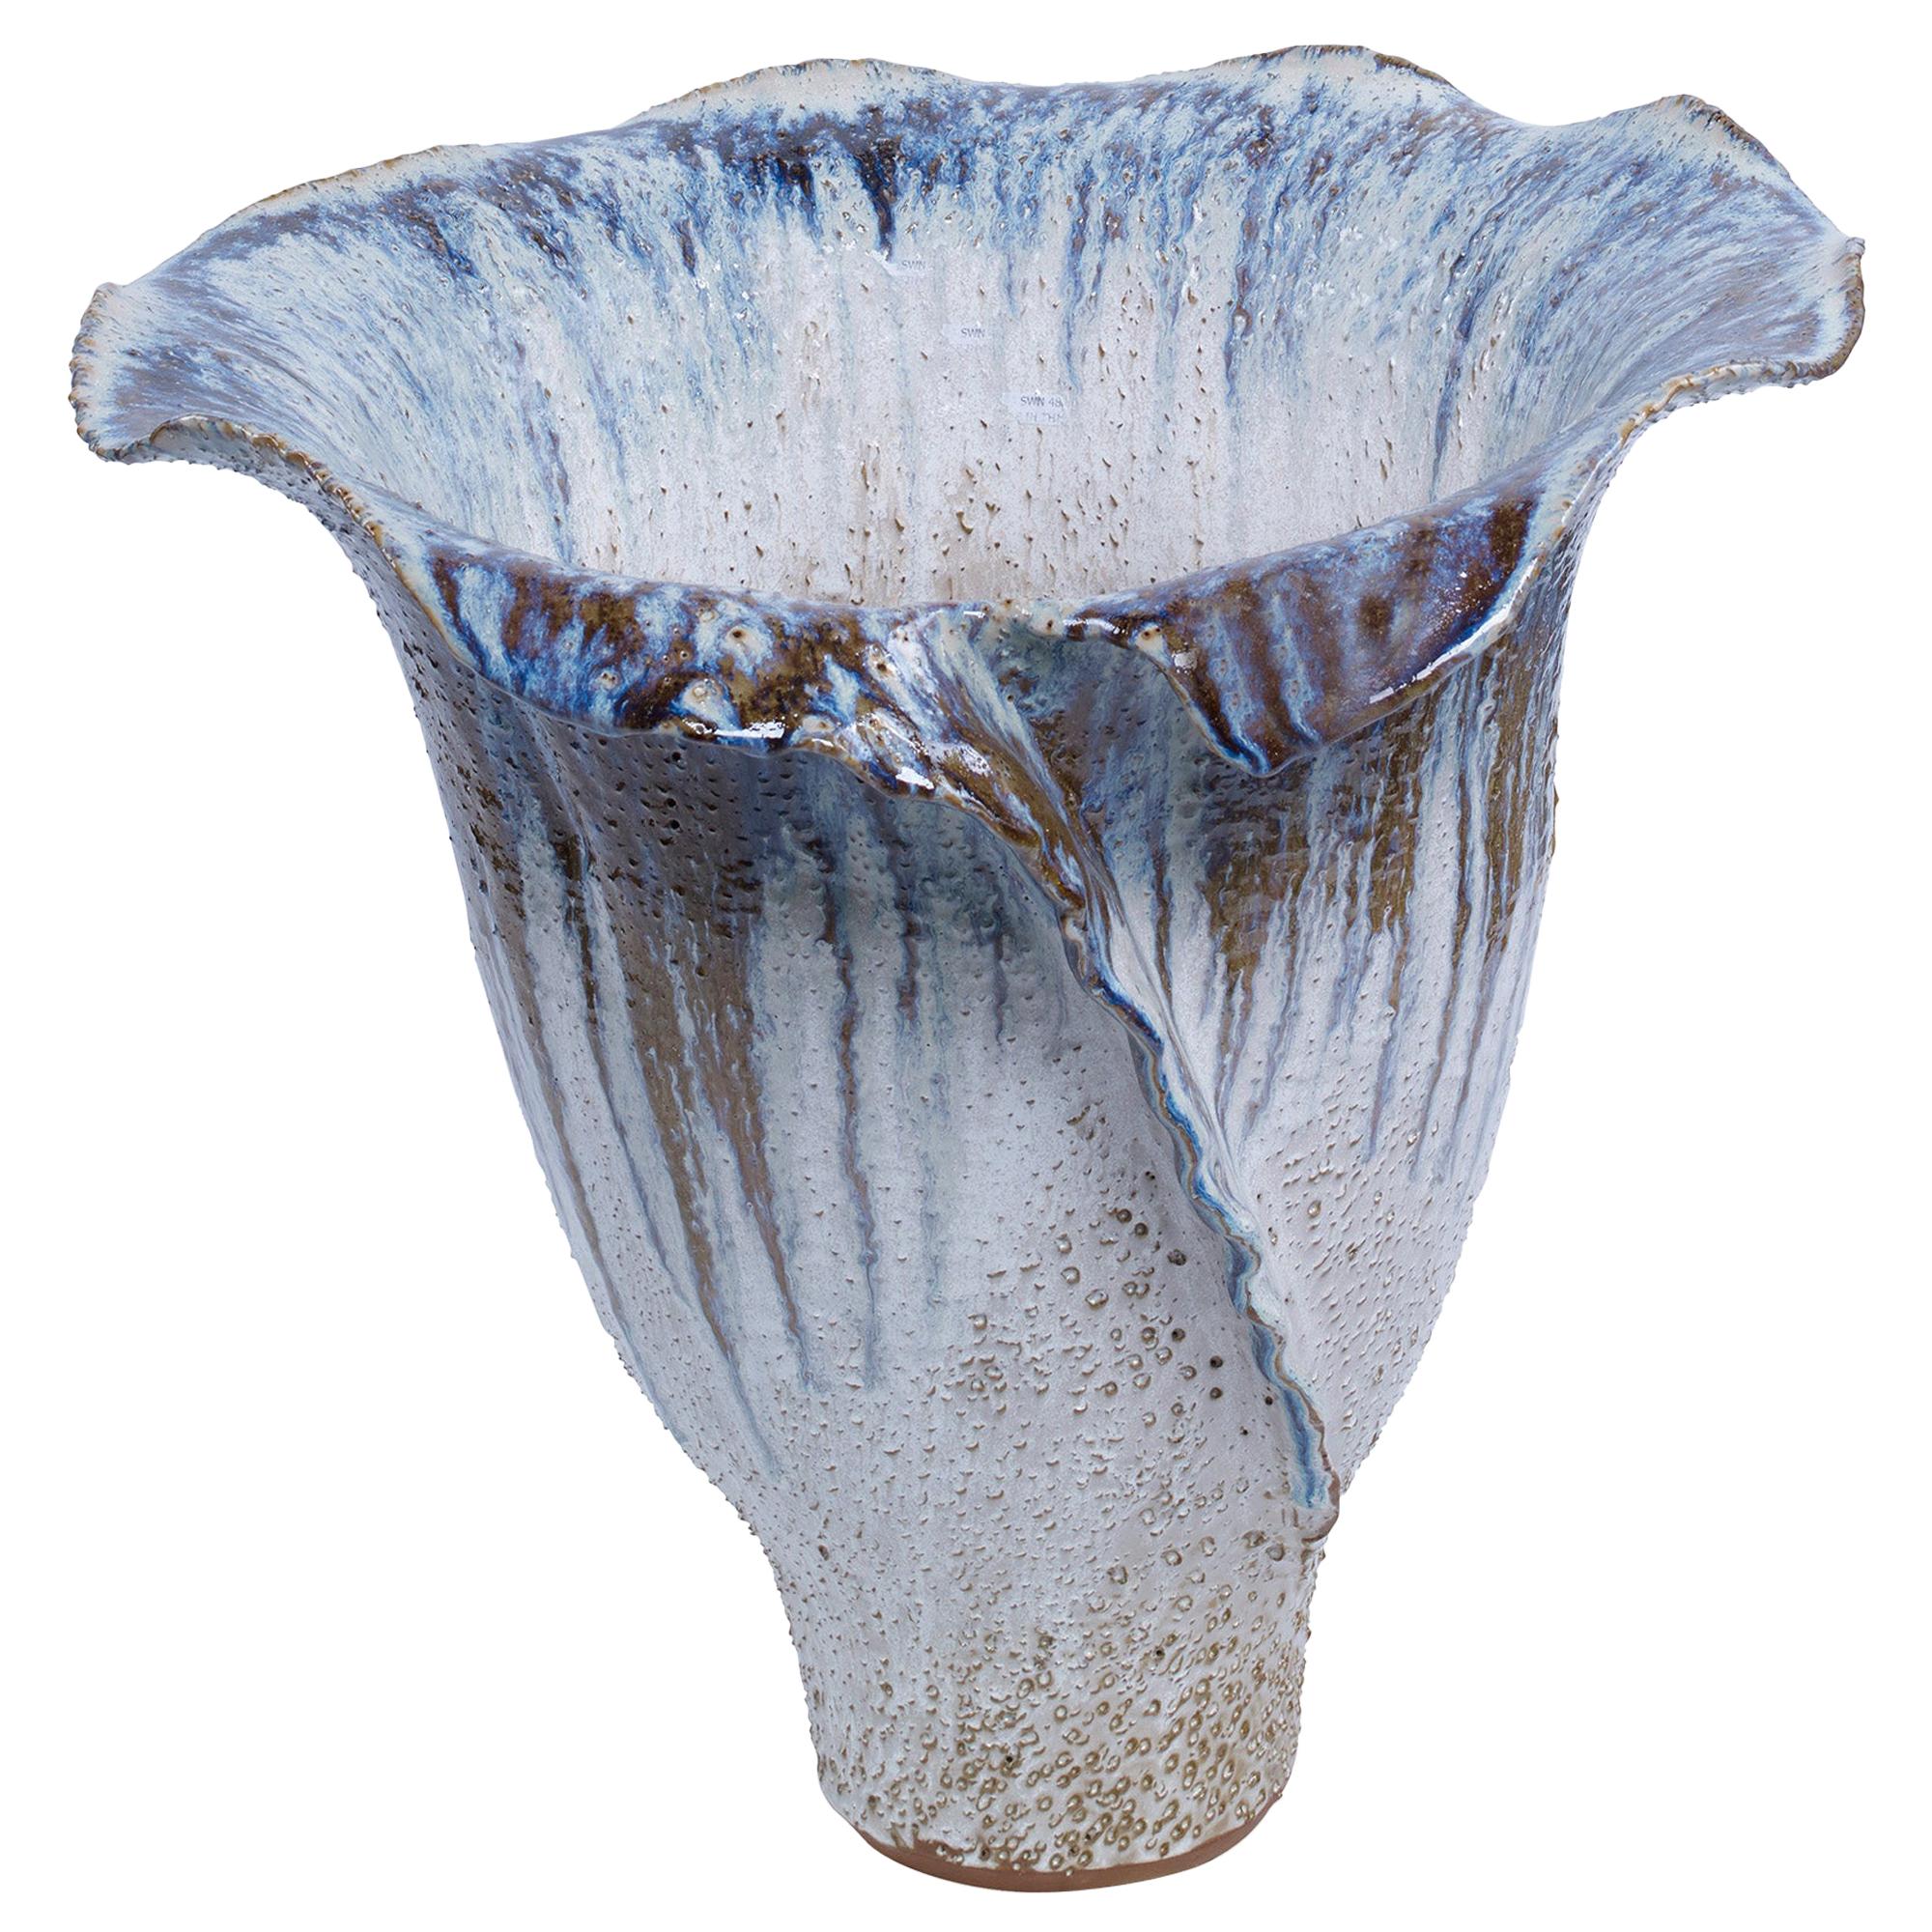 Flora Stoneware Vase with Reactive Finish by CuratedKravet